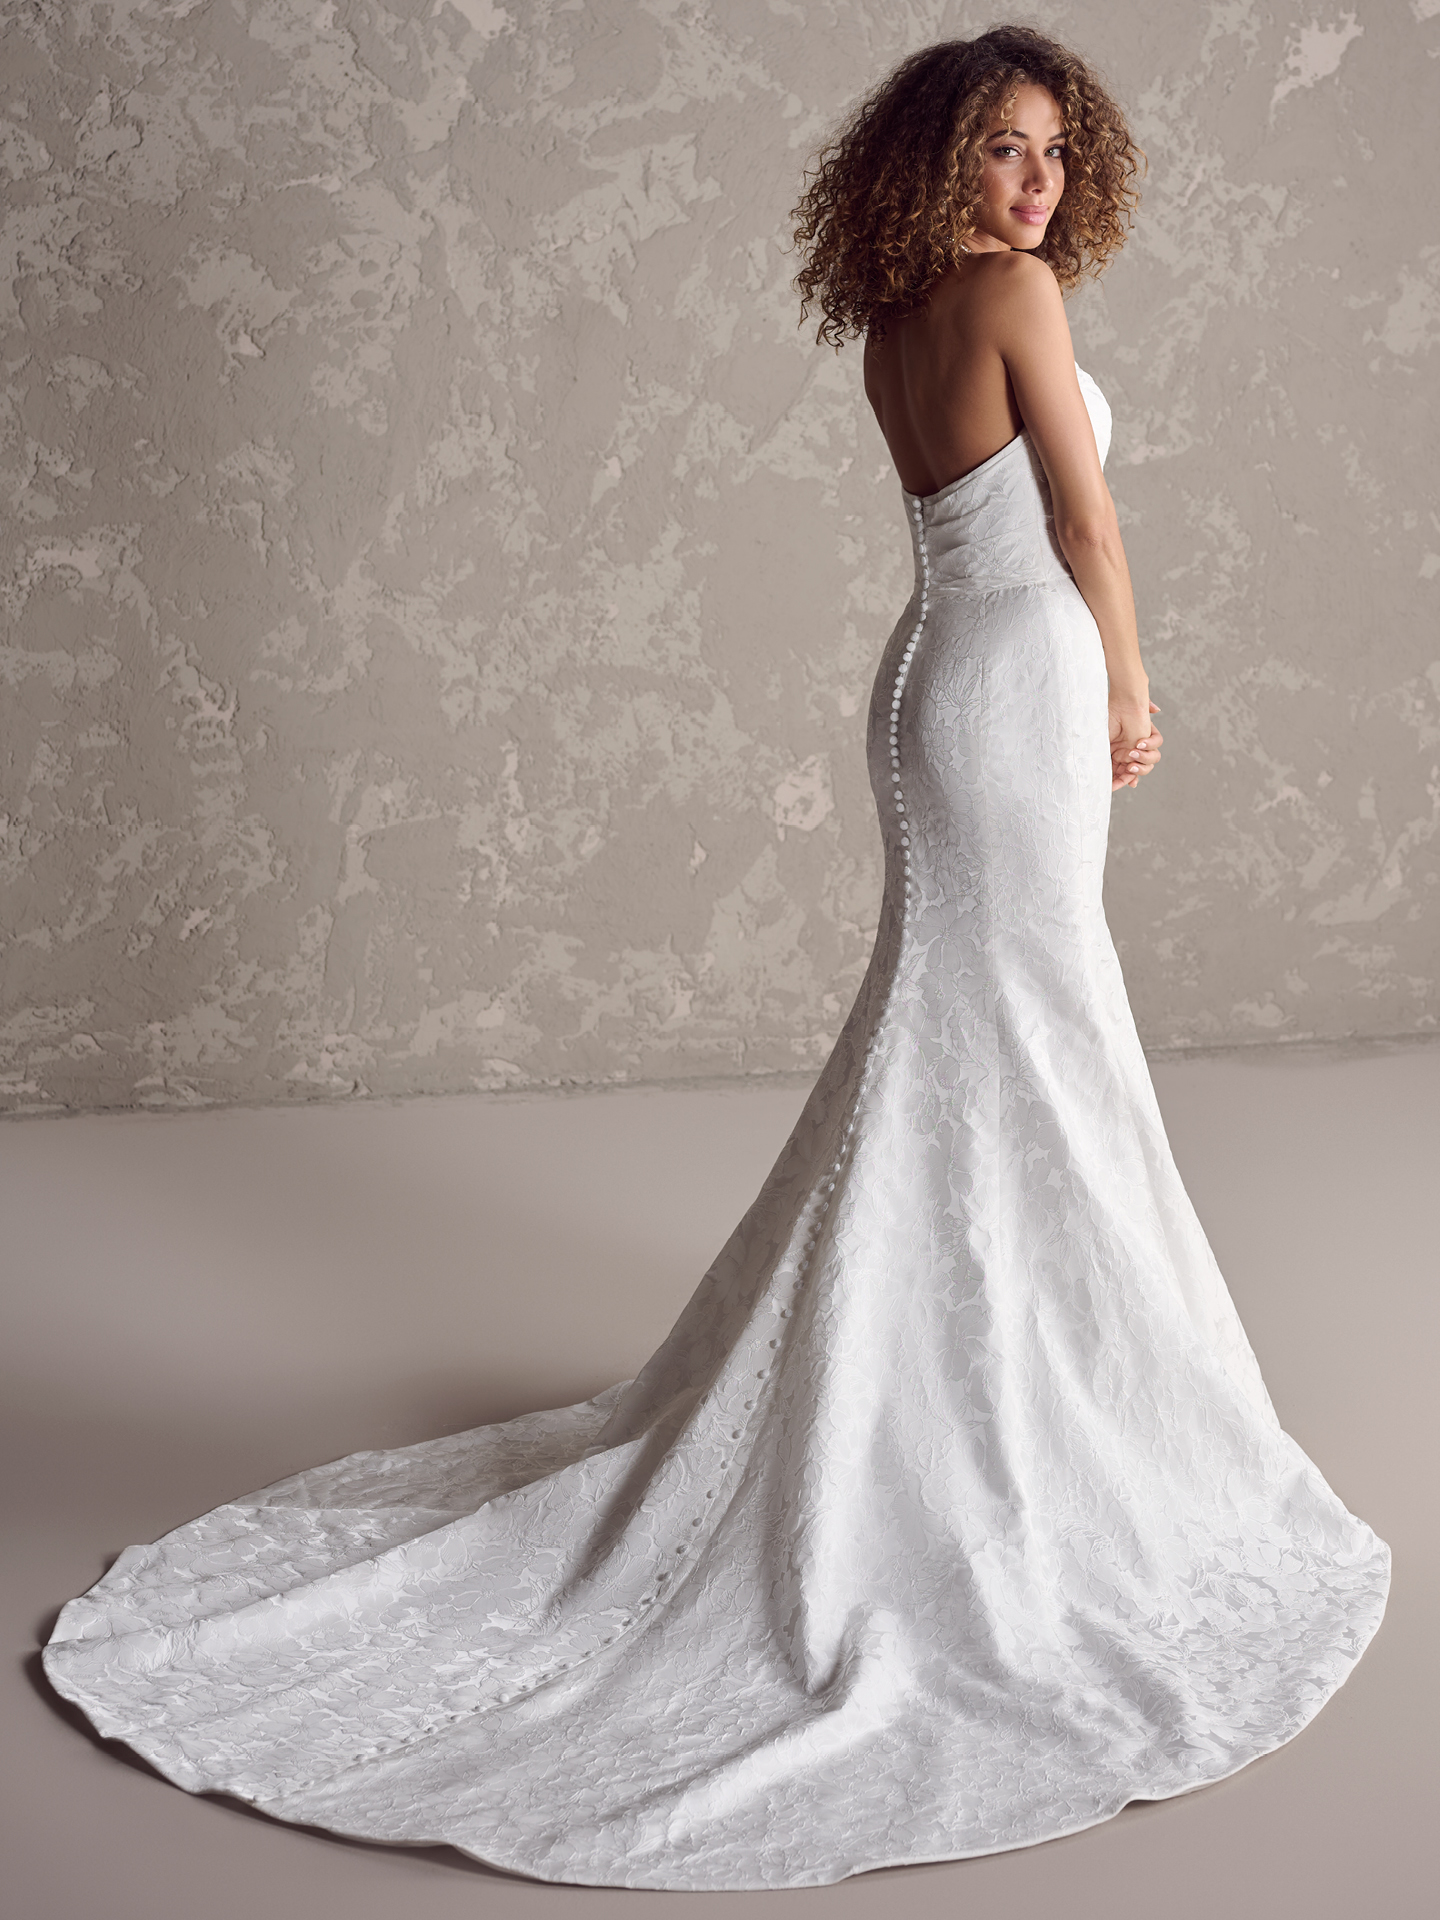 Strapless Jacquard Fit-and-Flare Gown by Maggie Sottero - Image 2